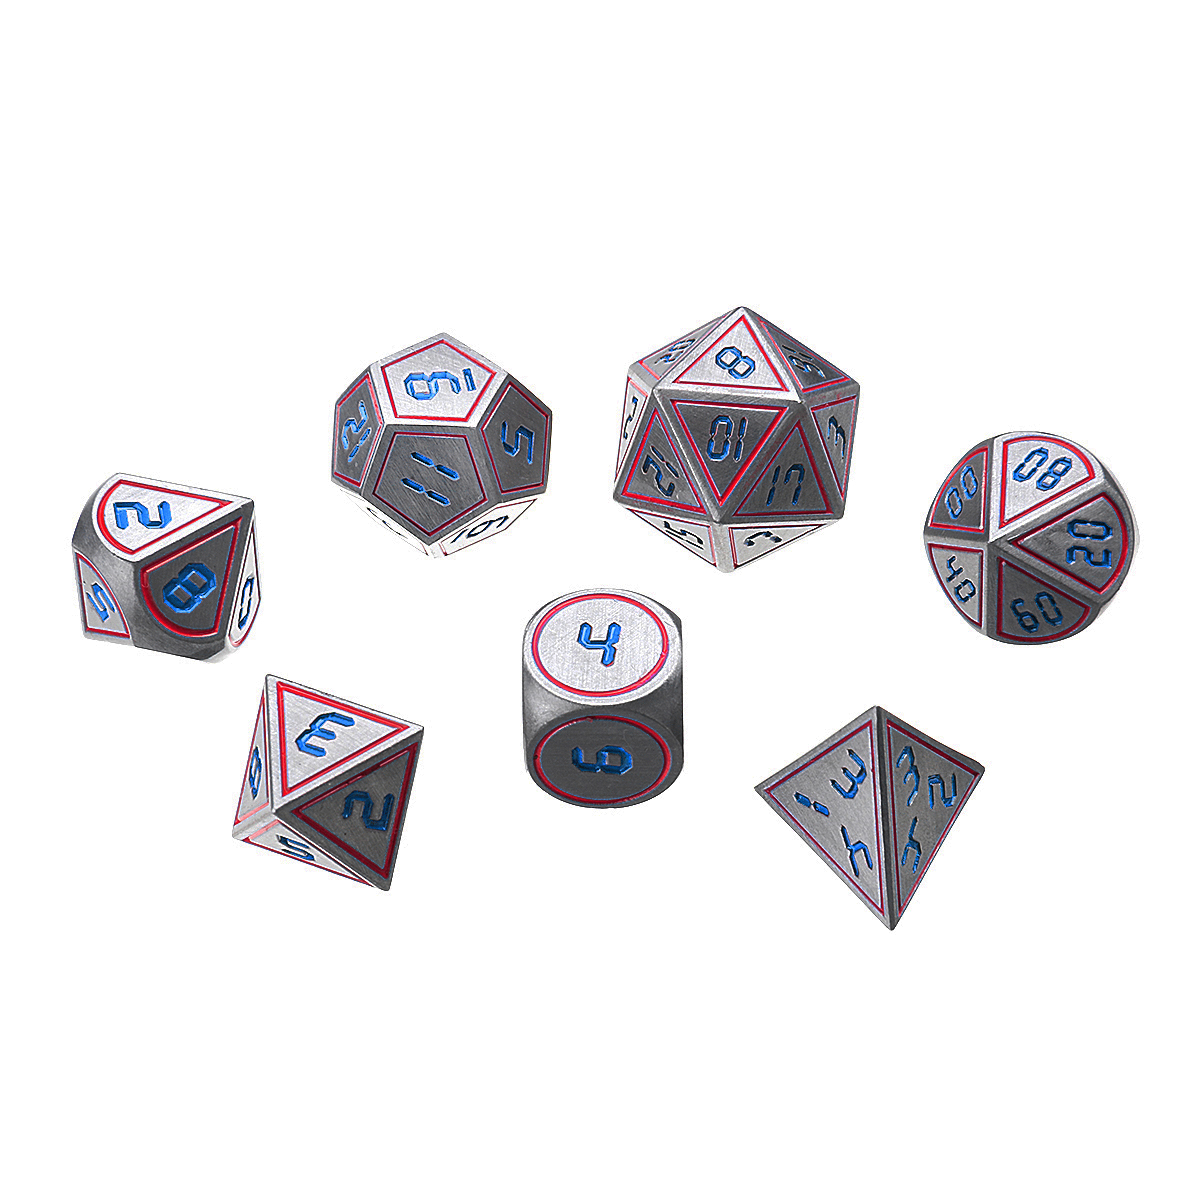 7Pcs-Double-Color-Polyhedral-Metal-Game-Dices-Kit-Children-Digital-Education-Number-Dices-Entertianm-1431443-9